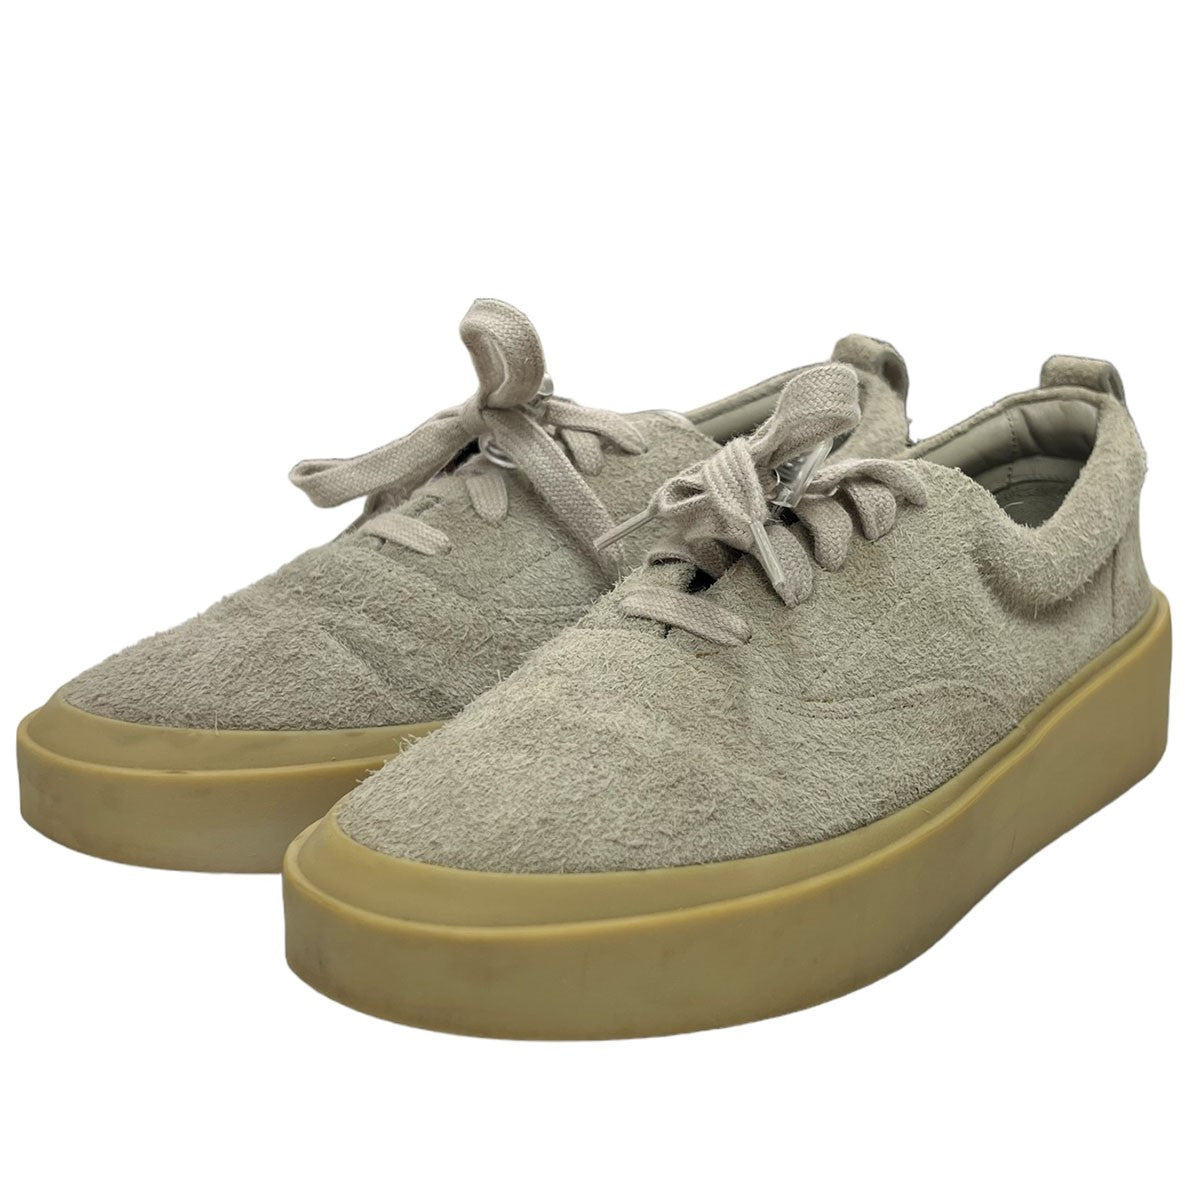 FEAR OF GOD(フィアオブゴッド) 101 Lace Up Low Top スウェード ...